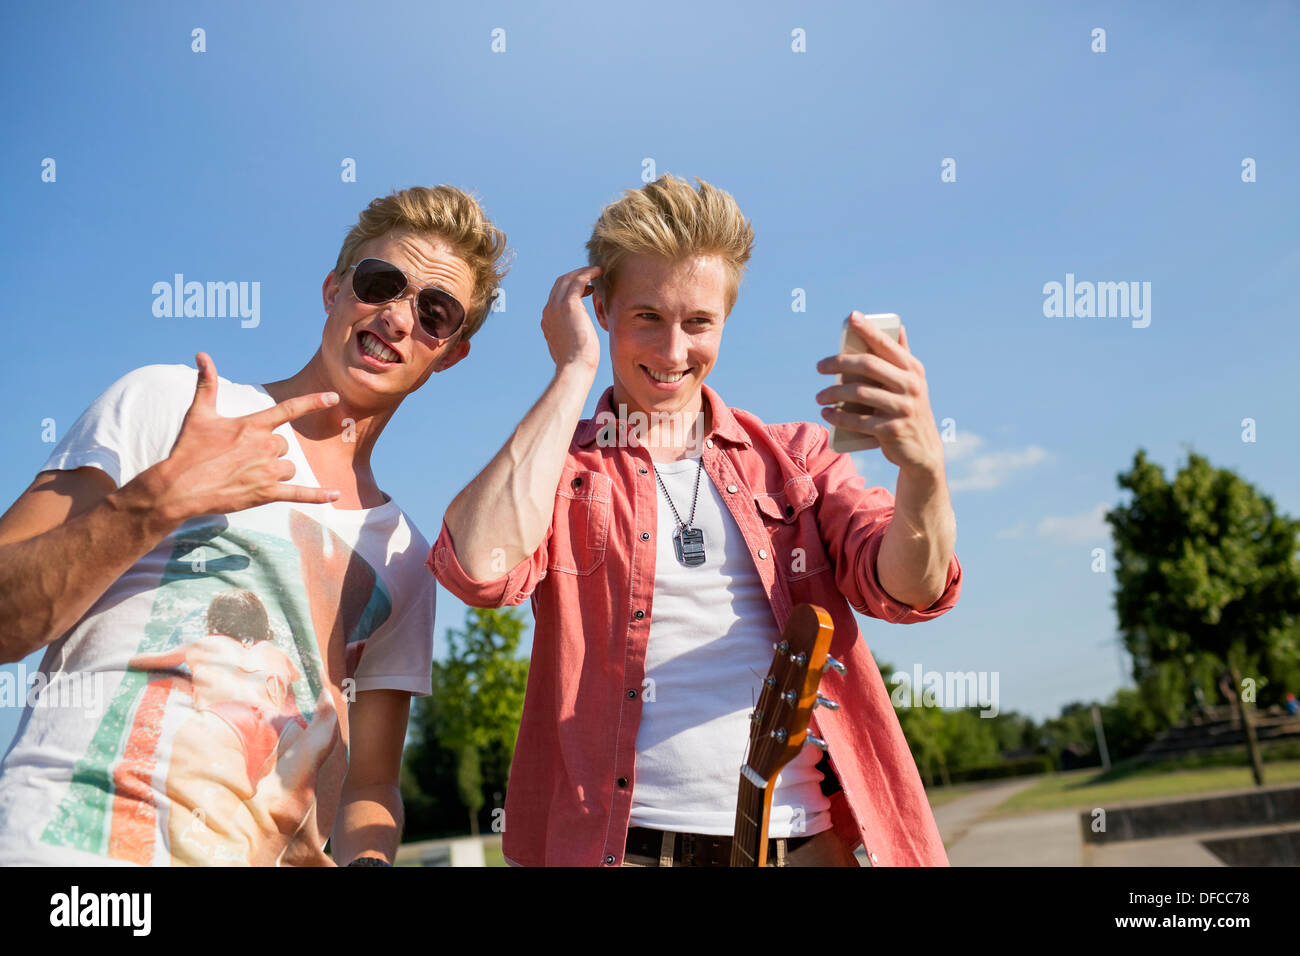 Germany, Young man is making rock' roll sigh, while friend is checking his looks Stock Photo